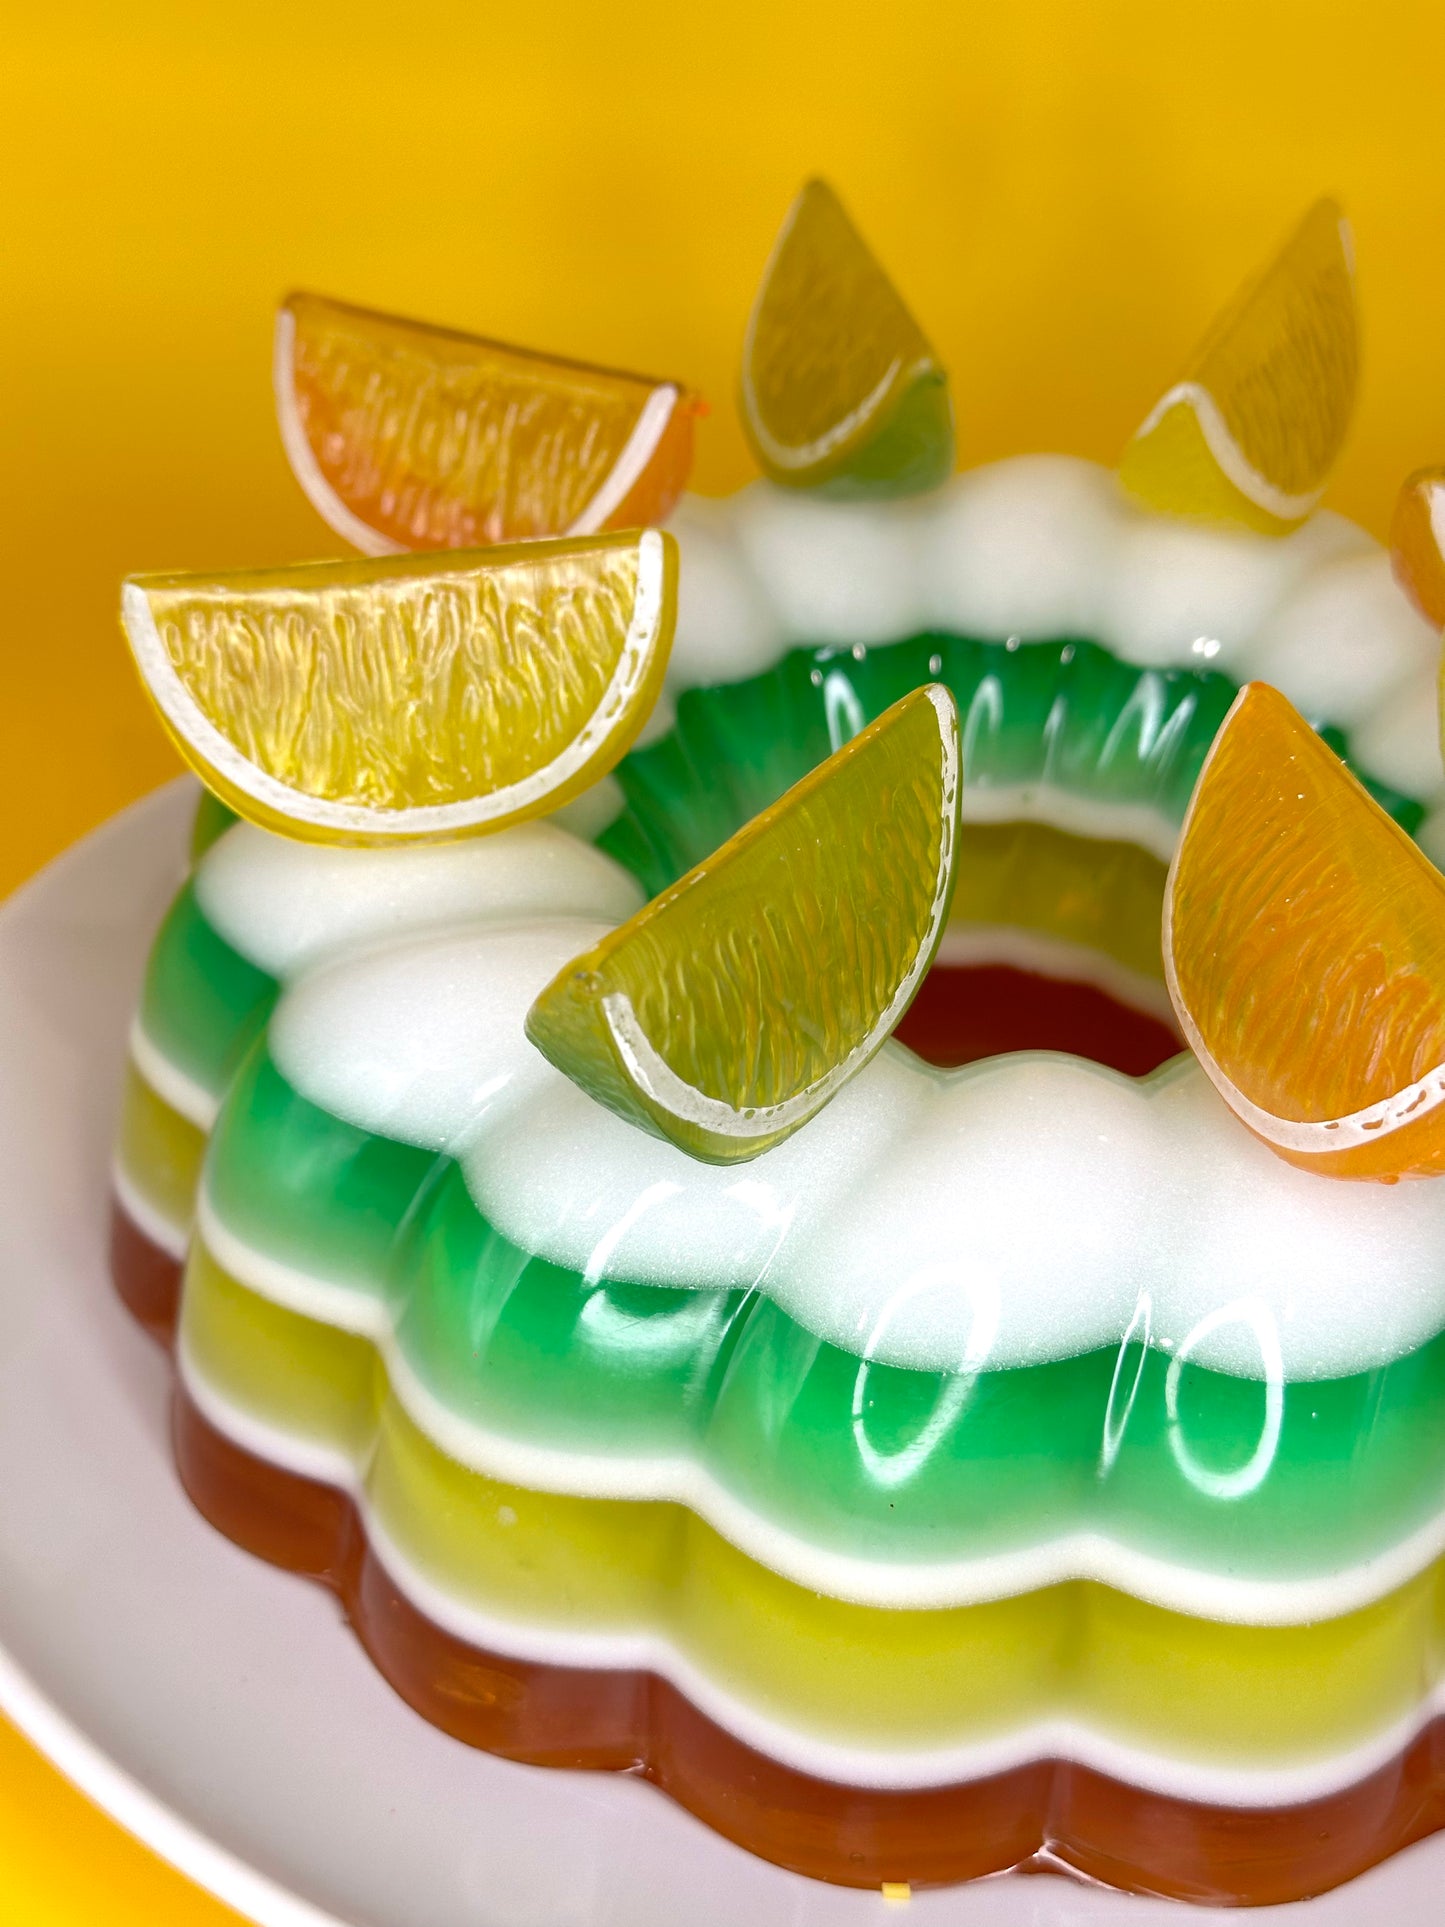 Large Citus Jello Mold in 3 colors and built-in Light